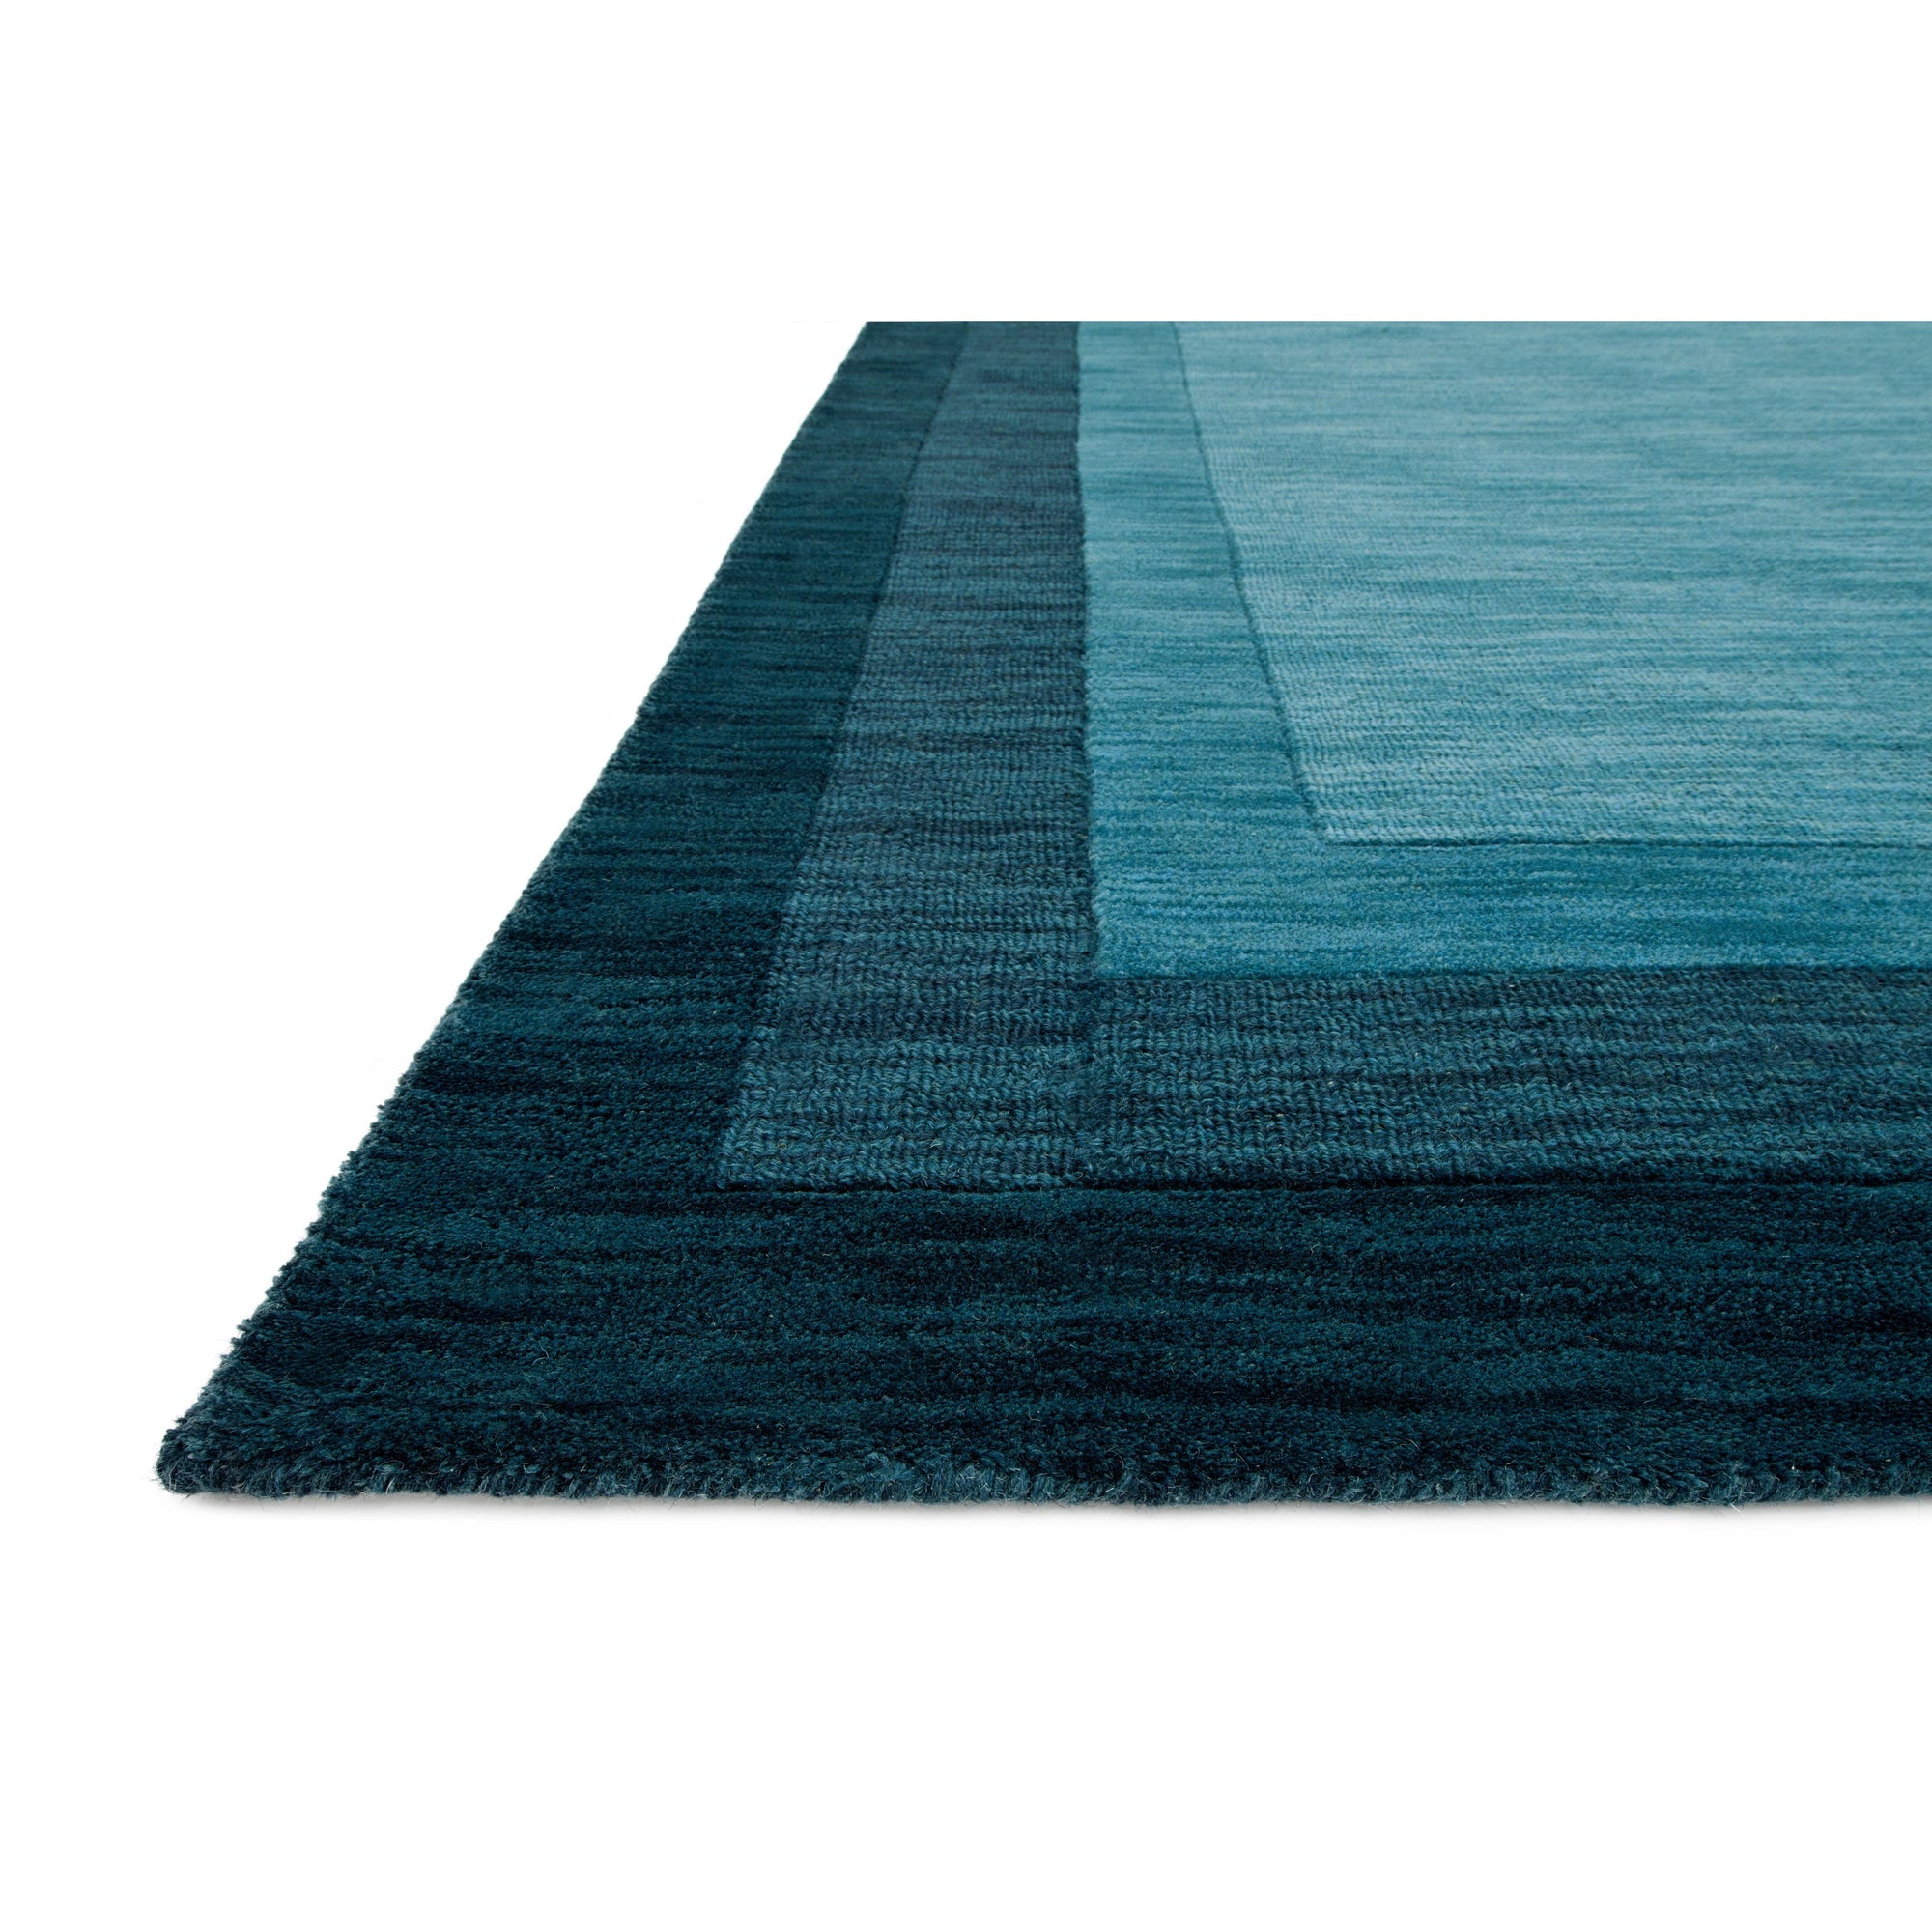 Rugs by Roo Loloi Hamilton Teal Area Rug in size 18" x 18" Sample